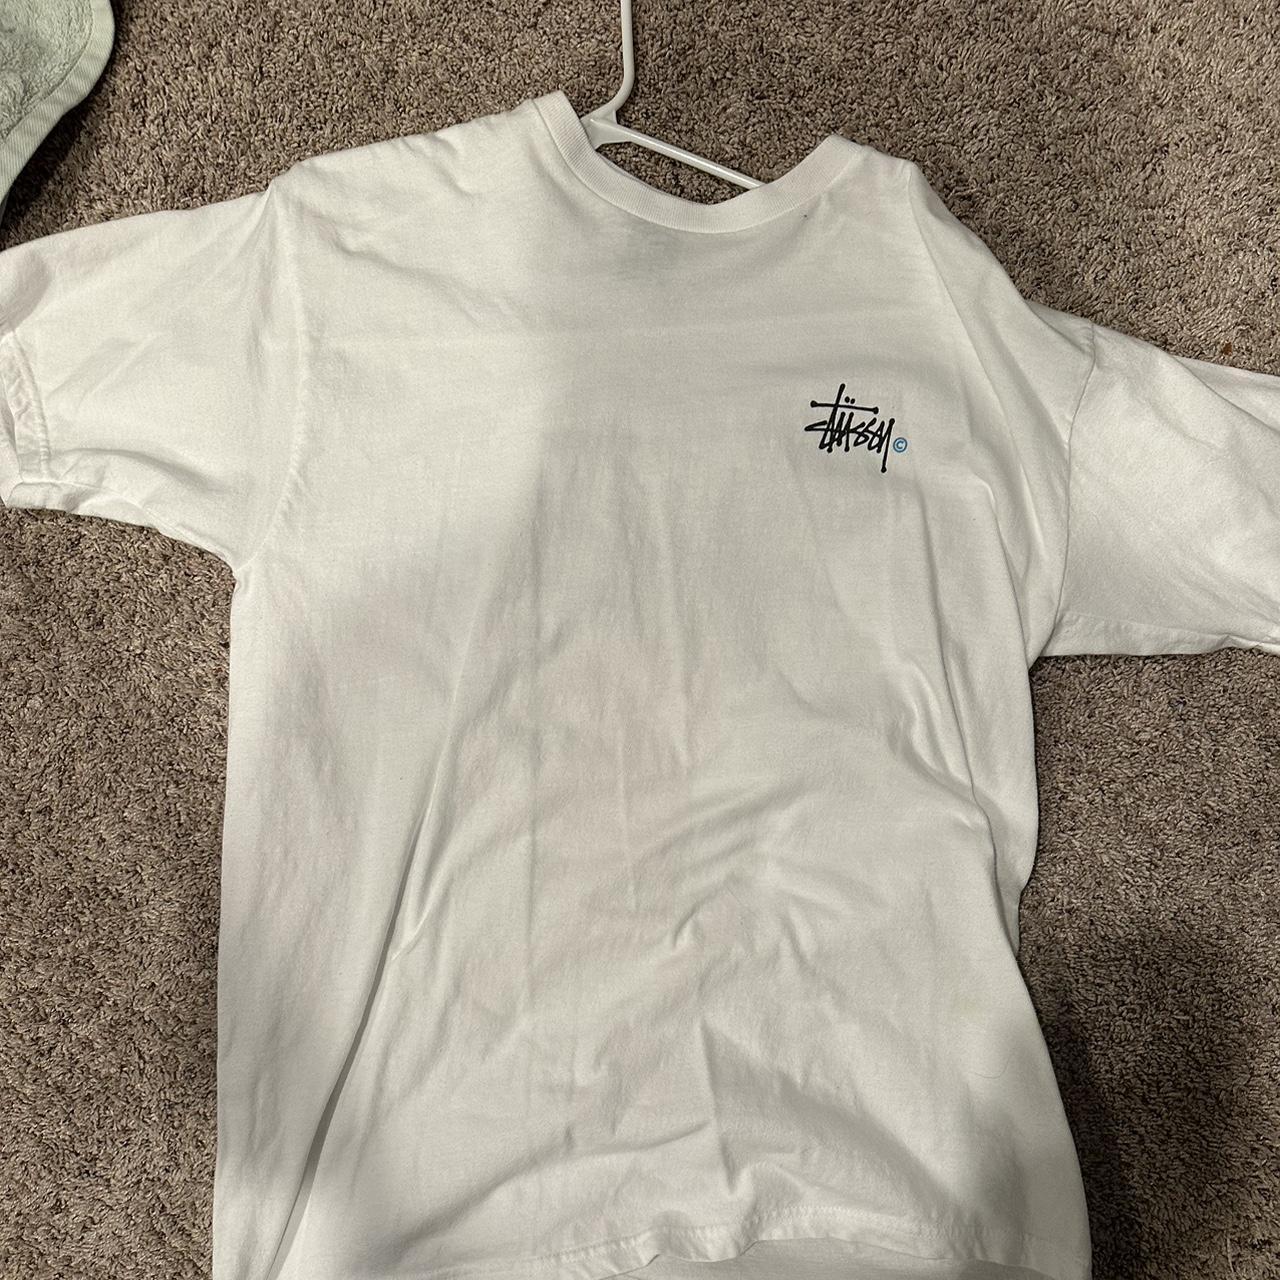 Cool stussy shirt no stains no flaws at... - Depop